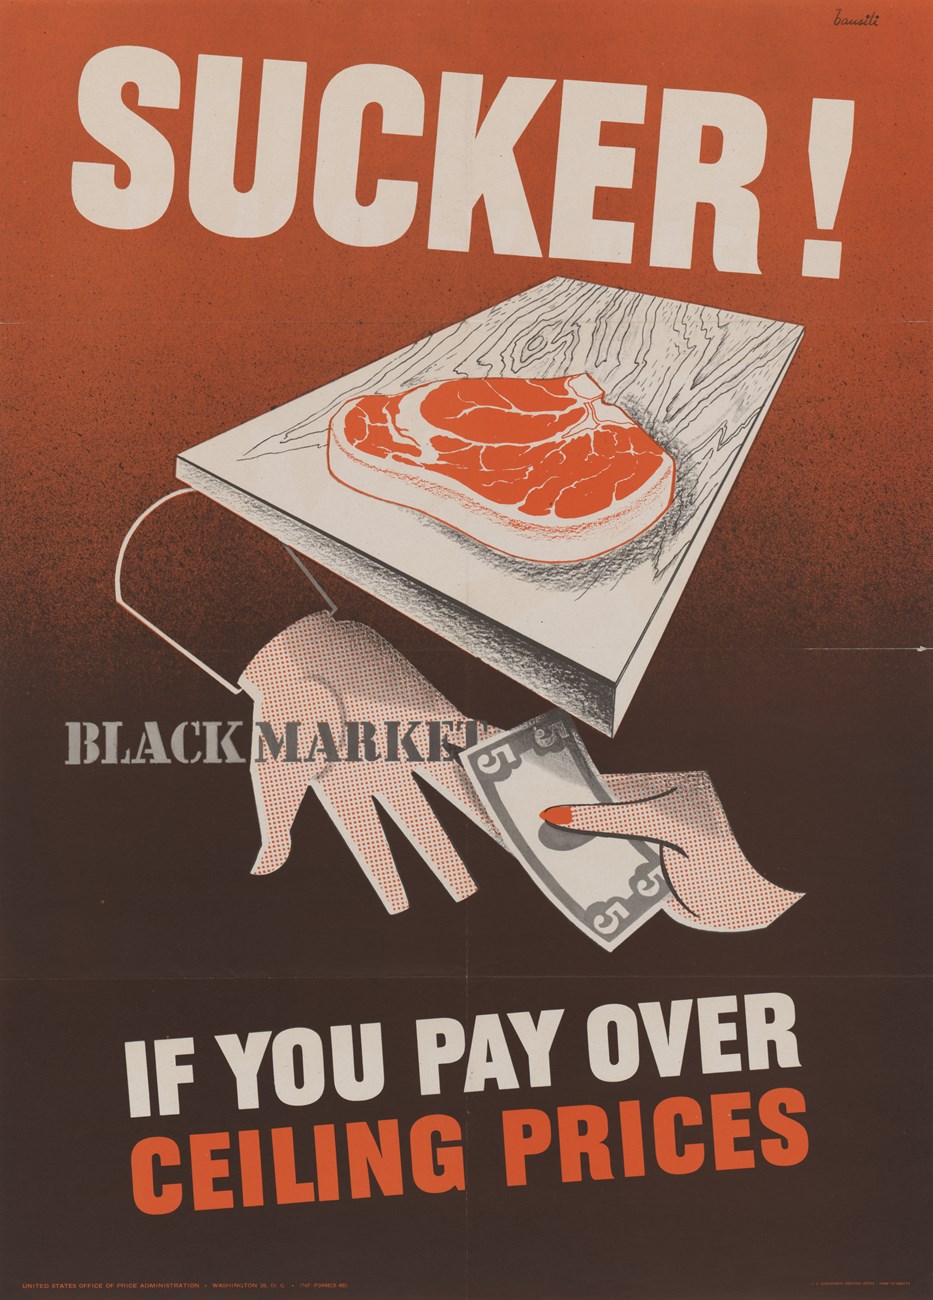 A graphic color poster showing a large steak sitting on a counter. Underneath, a white man’s hand with “BLACKMARKET” printed over it, reaches for a $5 bill being offered by a white woman’s hand.